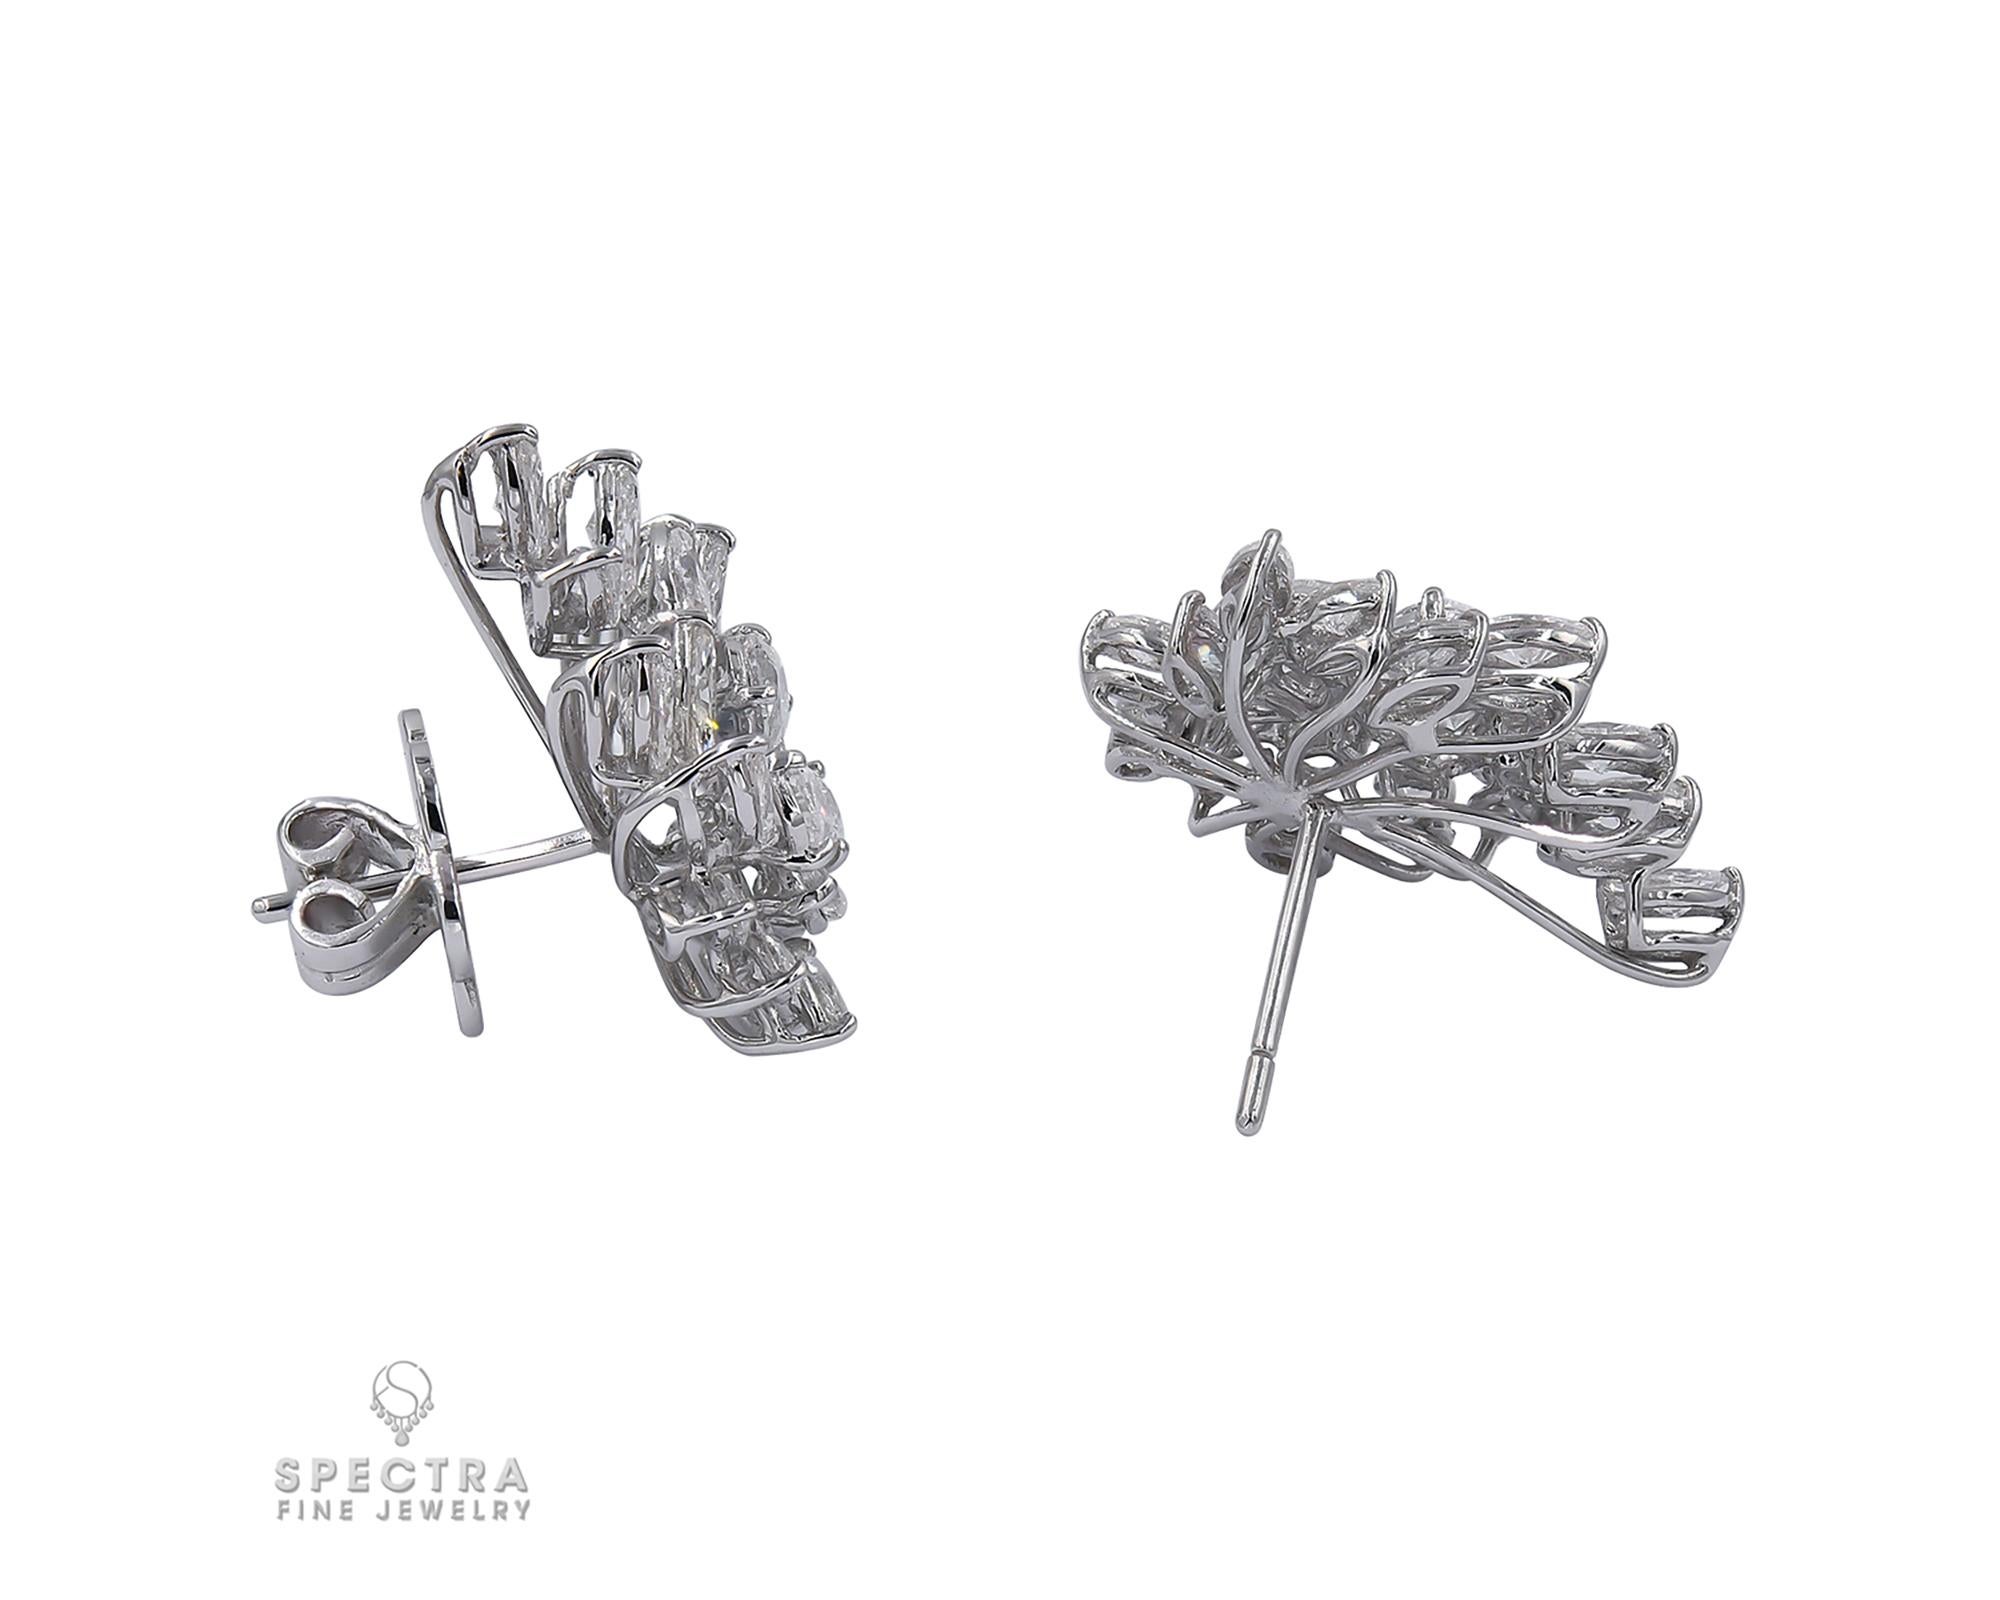 A pair of diamond cluster earrings set in 18K white gold. 
There are 22 diamonds on each earring totaling to 5.88 carats.
The diamonds are in mixed shapes: 32 marquise, 10 pear shape, and 2 round diamonds.
The color of the diamonds ranges from H to